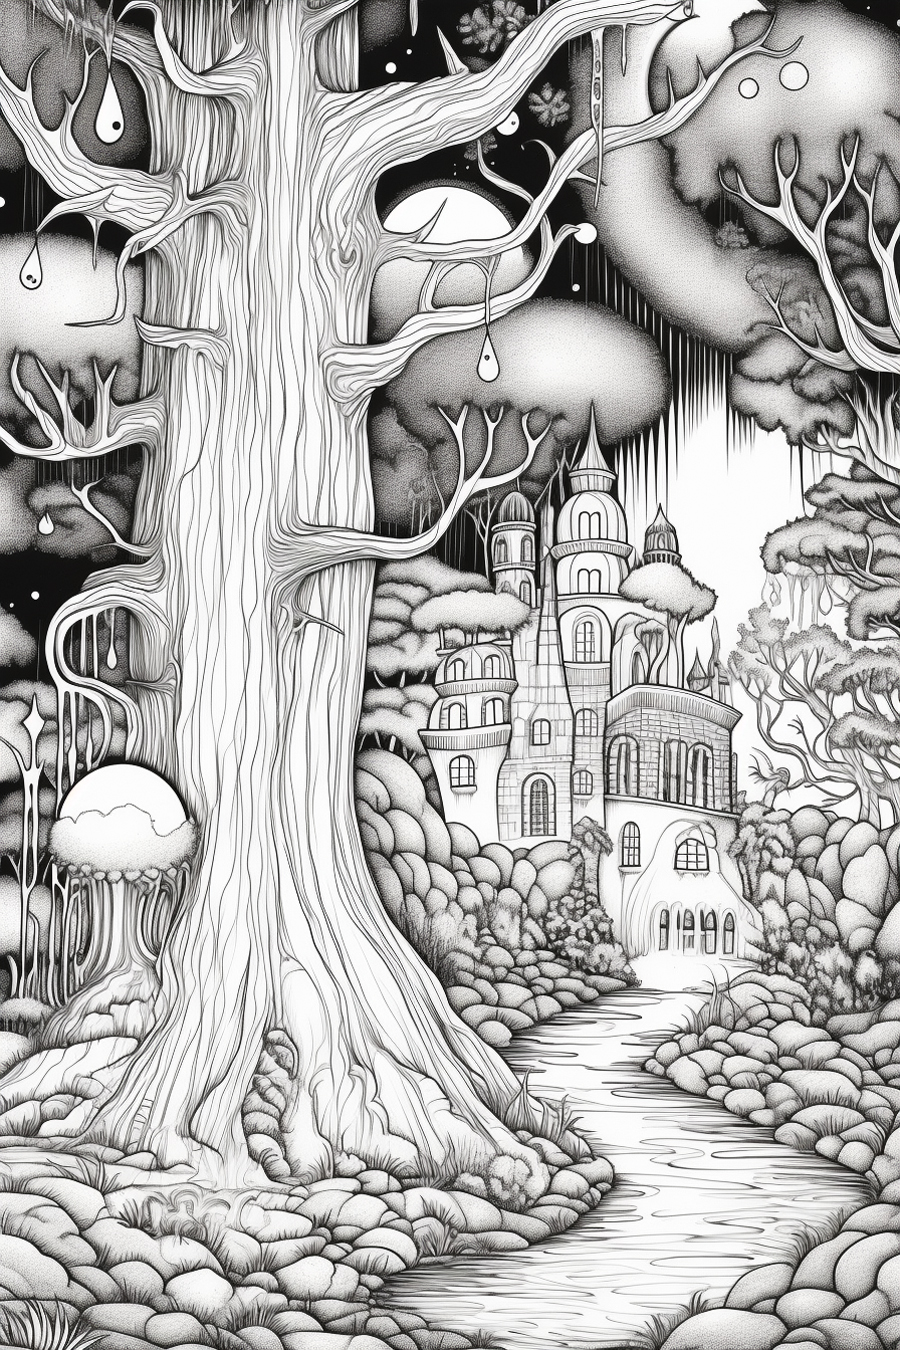 A black and white drawing of a castle in the forest.